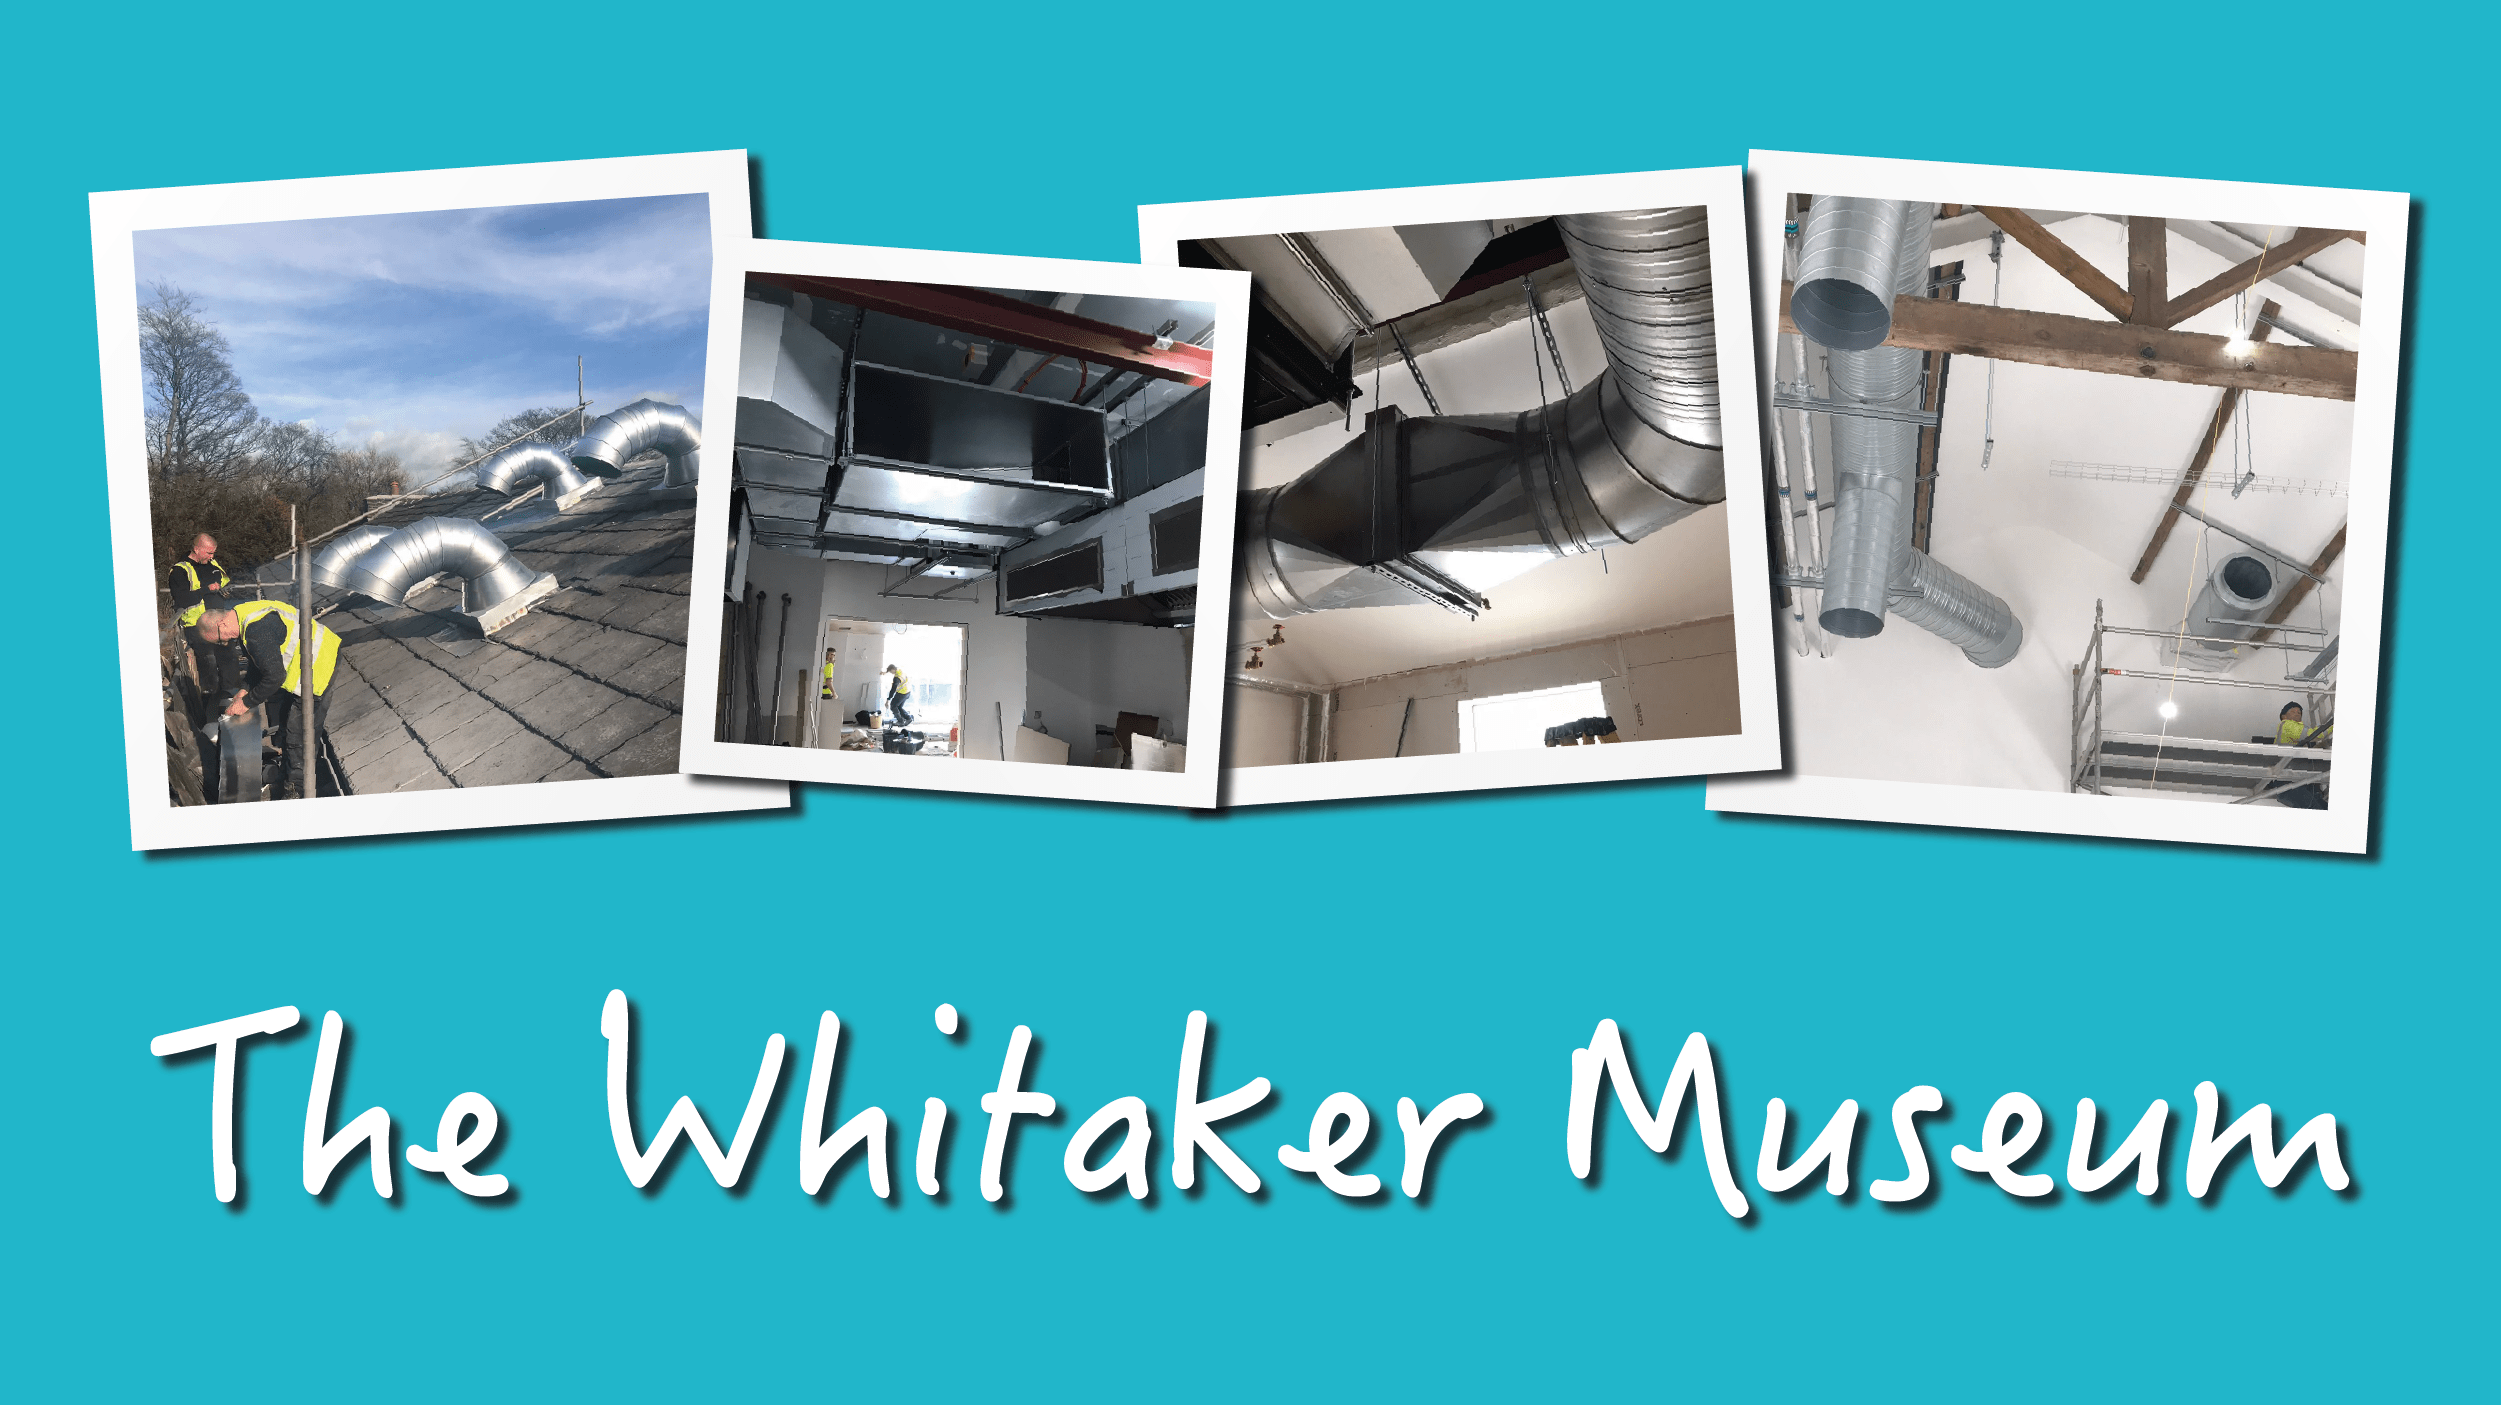 The Whitaker Museum